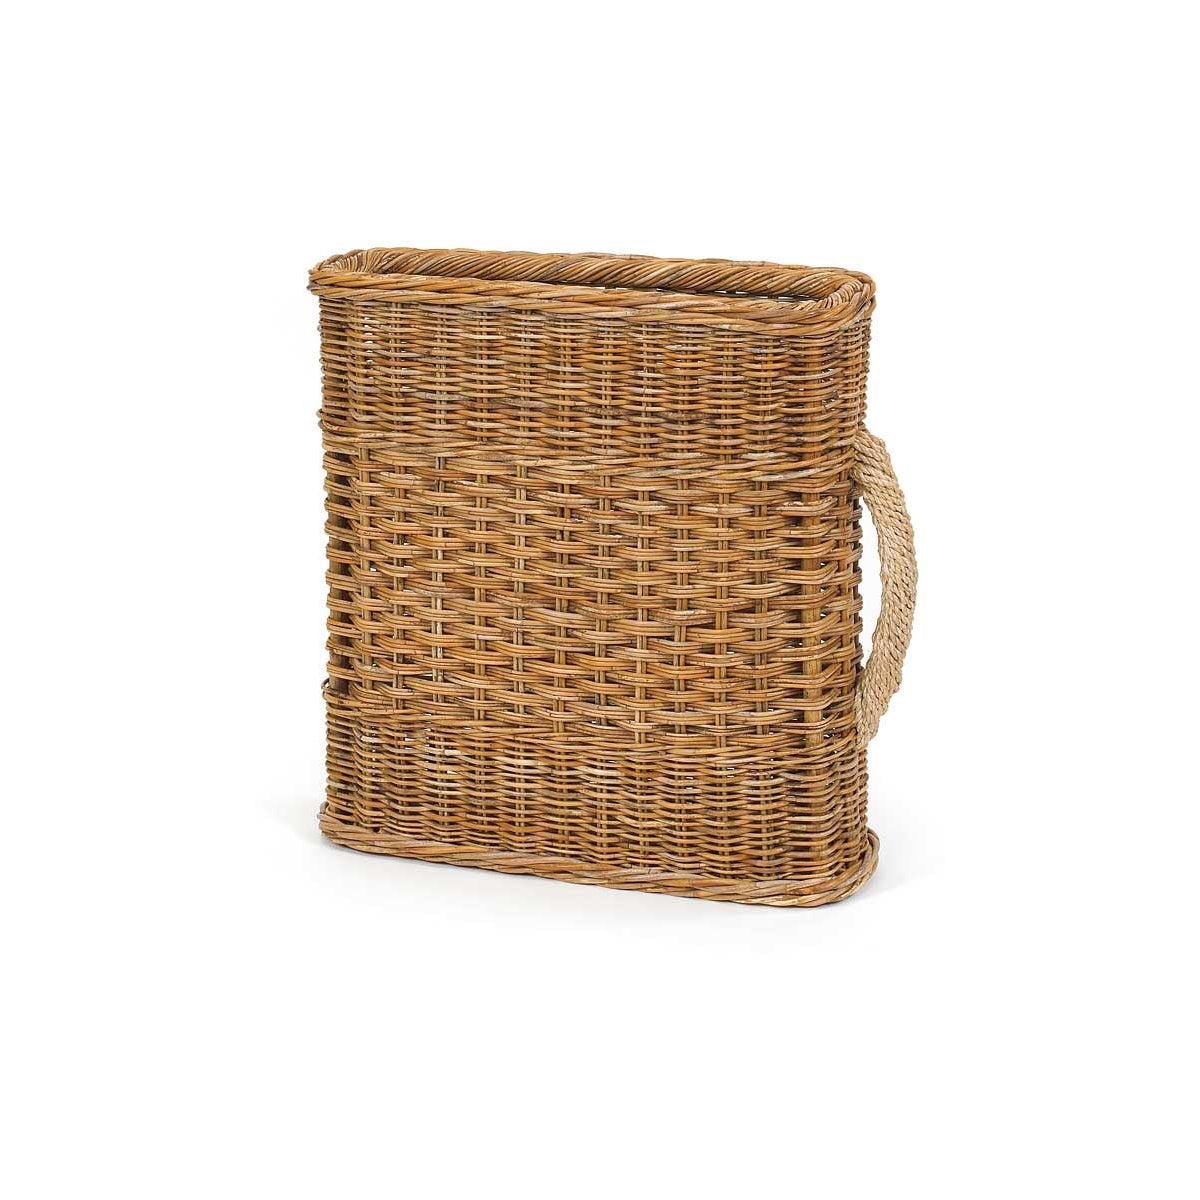 French Country Walking Cane Basket